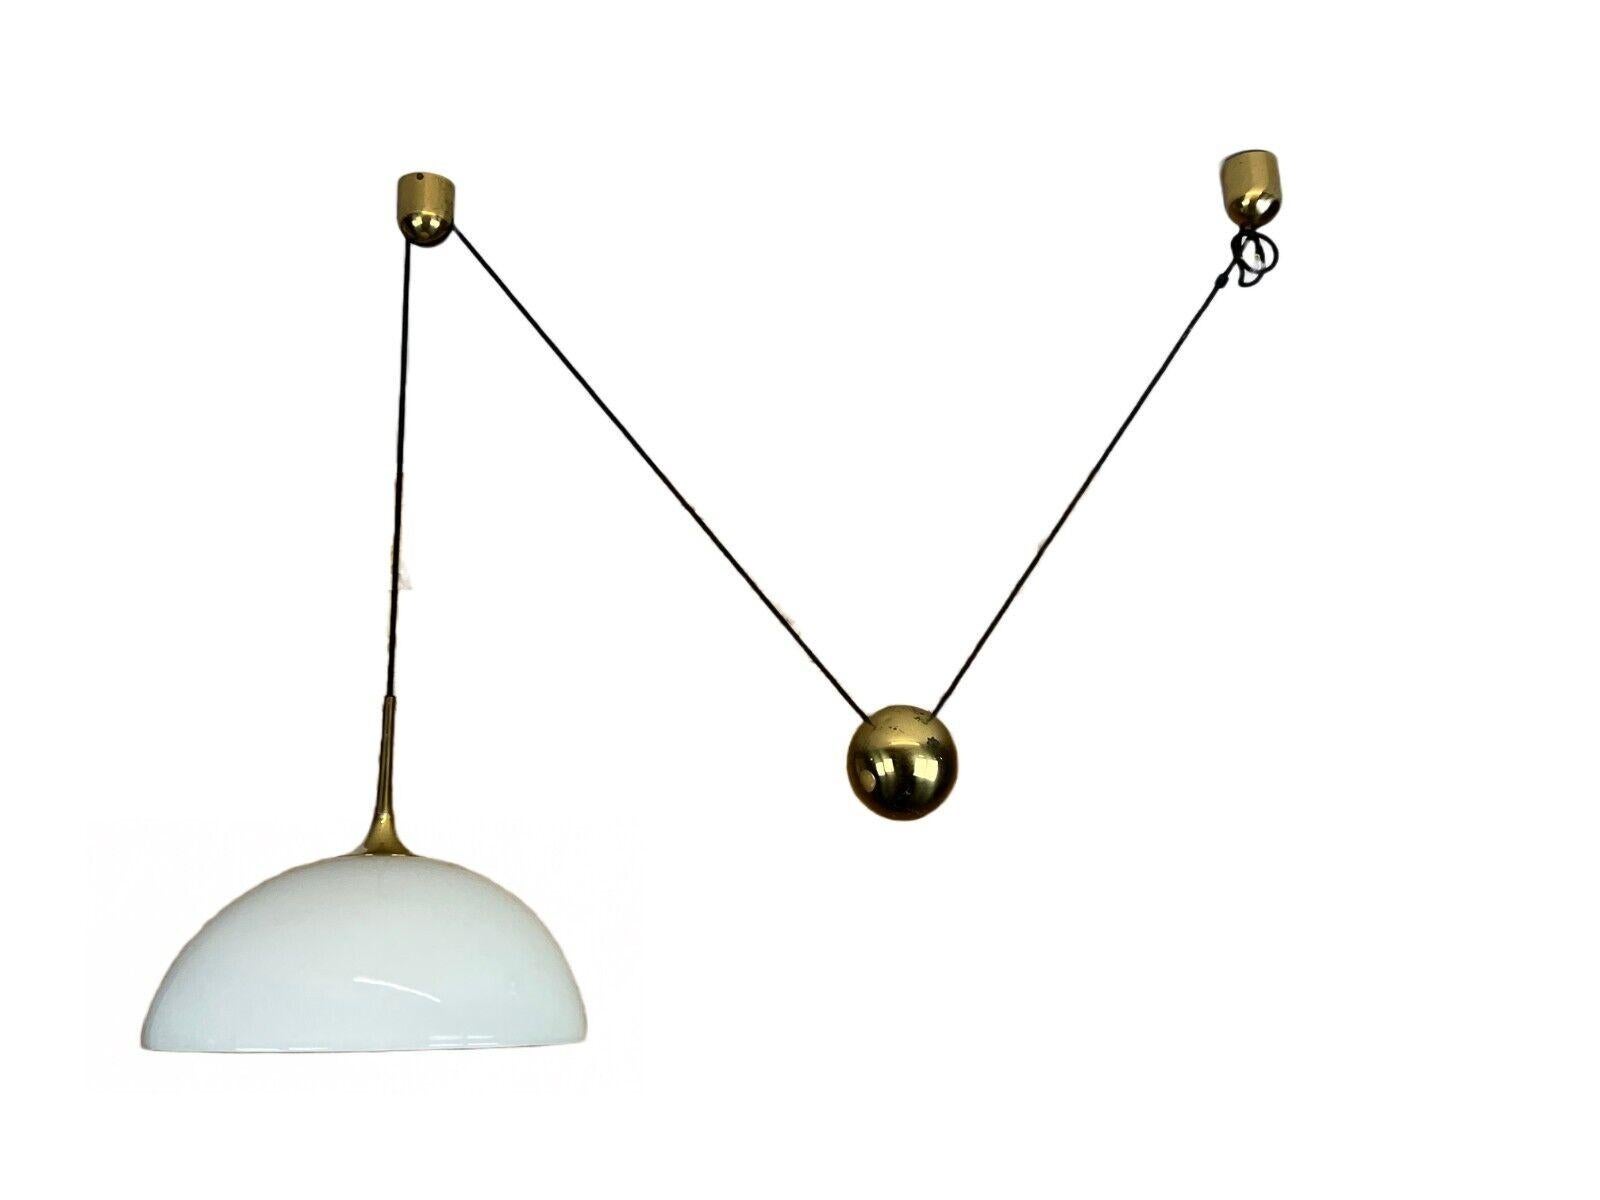 60s 70s lamp ceiling lamp hanging lamp Florian Schulz brass white design

Object: ceiling lamp

Manufacturer: Florian Schulz

Condition: good - vintage

Age: around 1960-1970

Dimensions:

Width = 130cm
Height = 96cm
Depth =